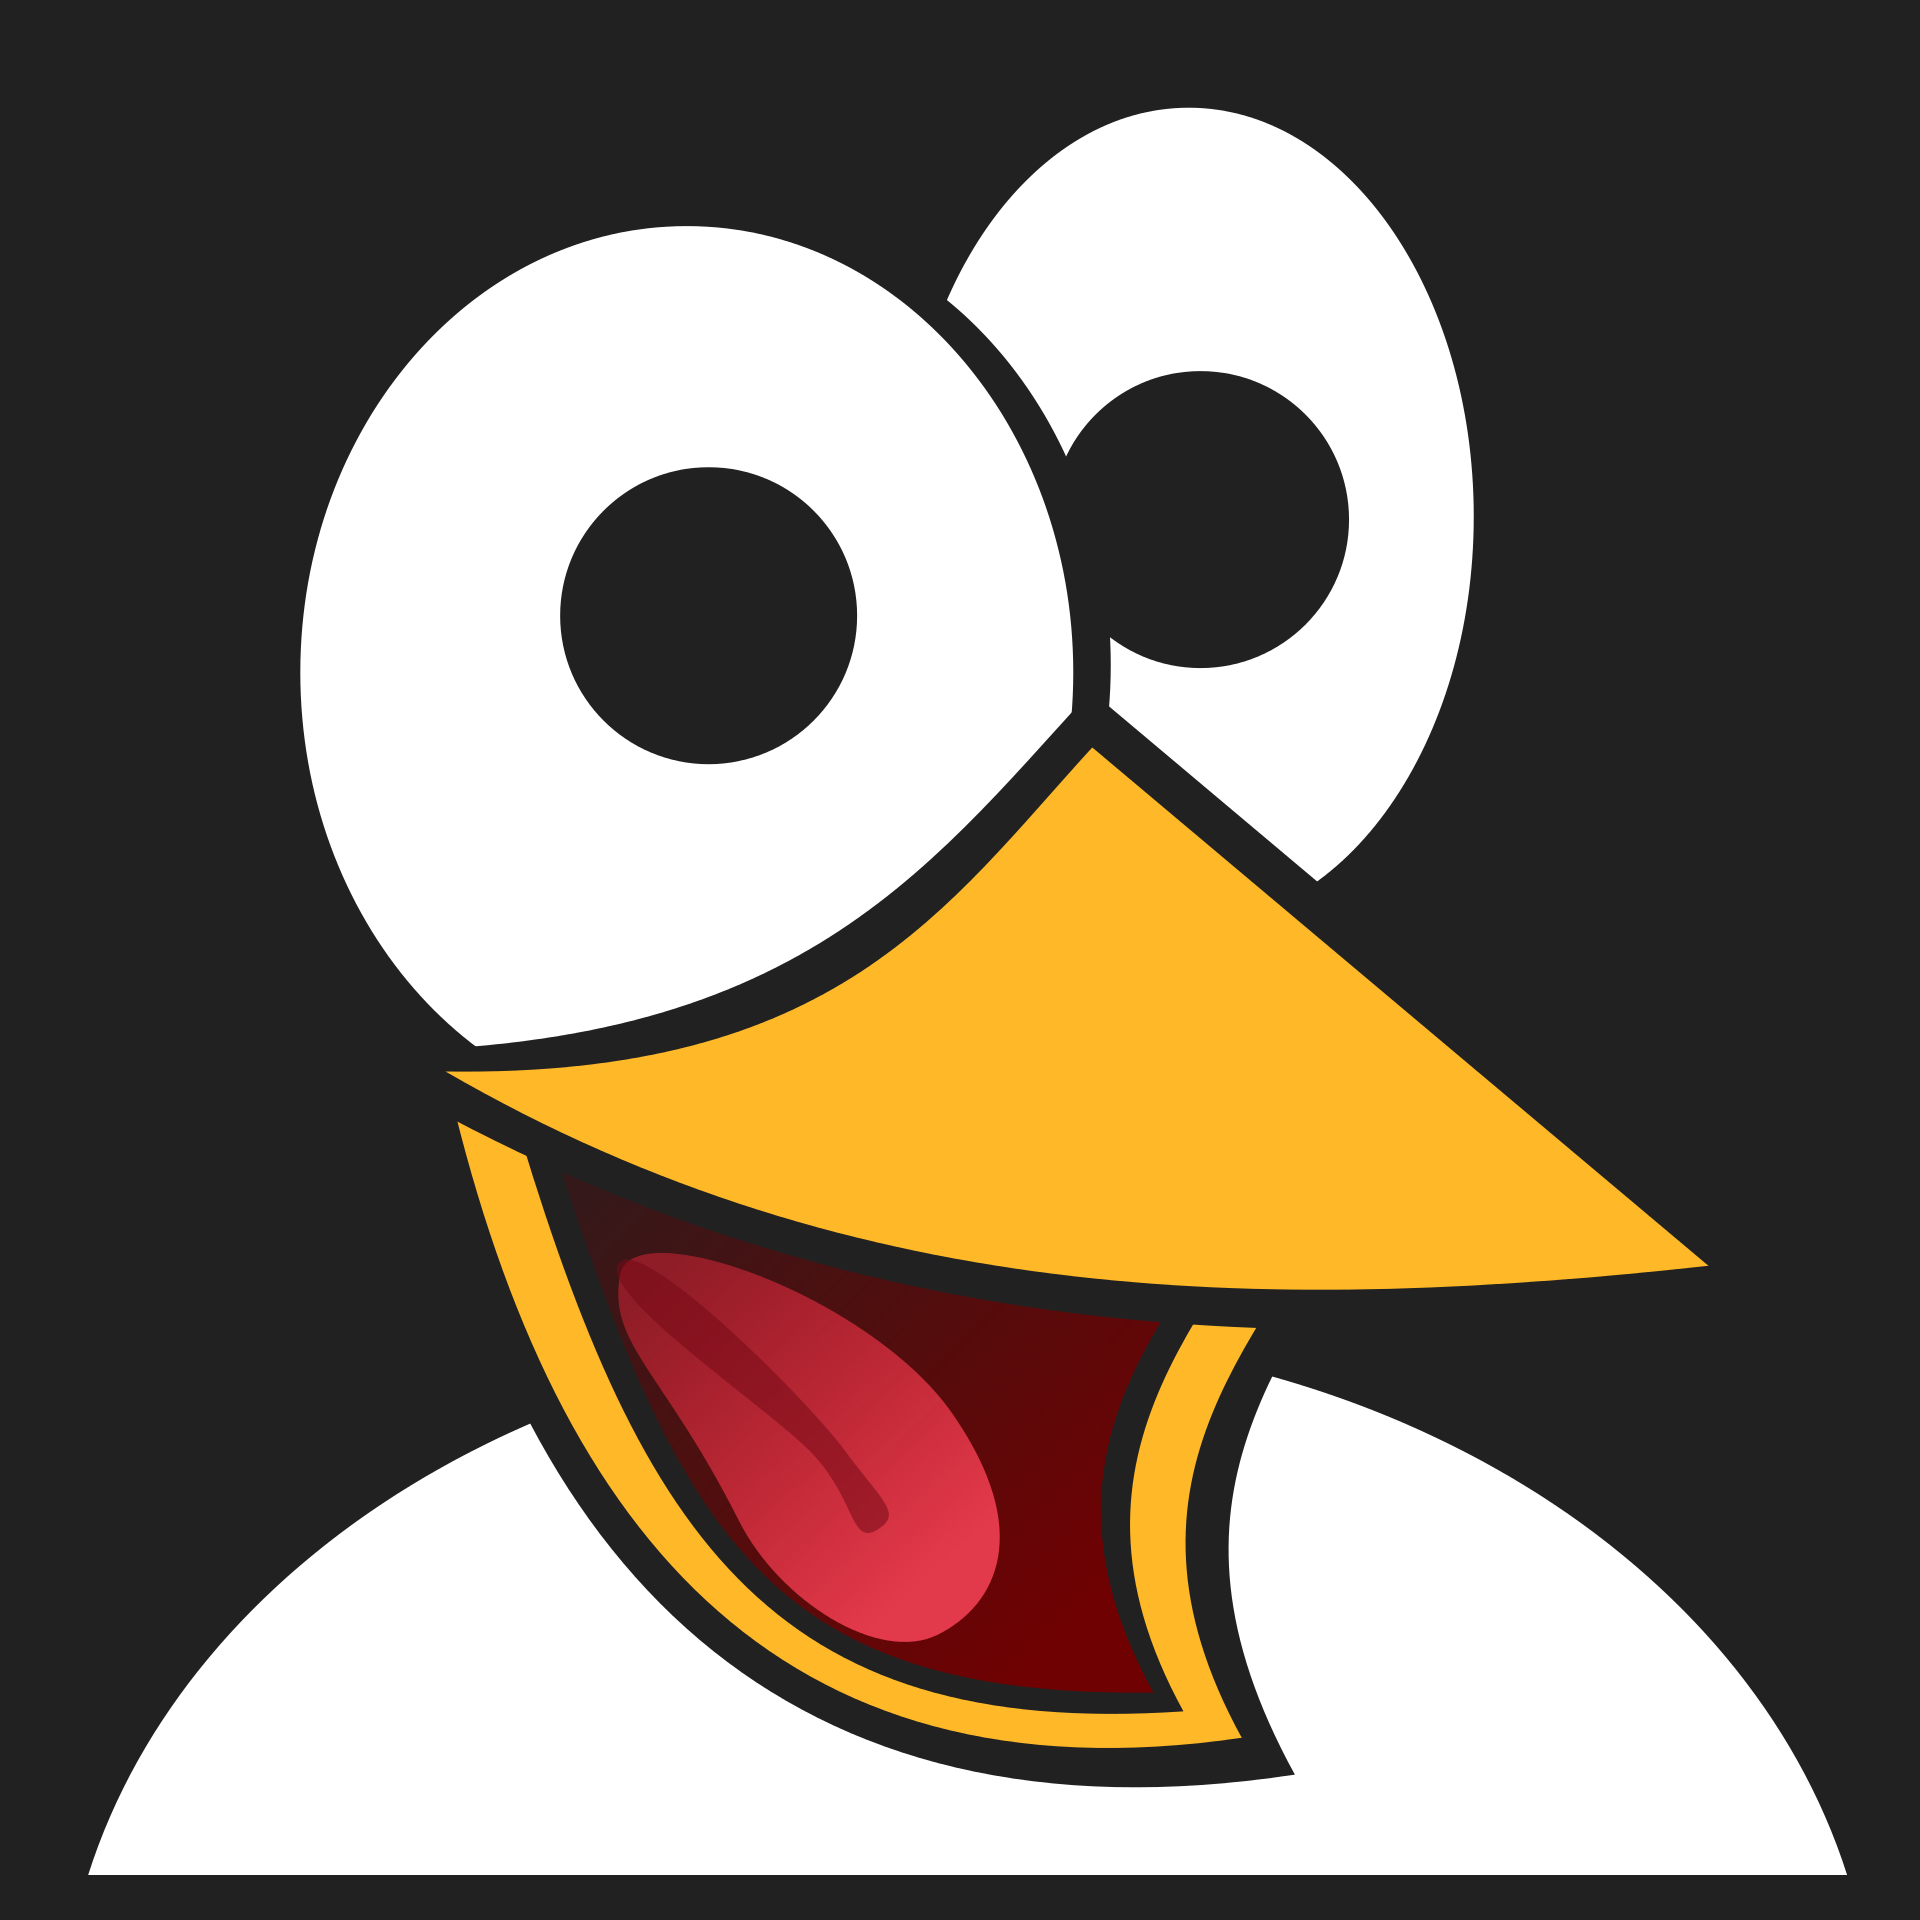 Avatar with funny penguin face as an illustration free image